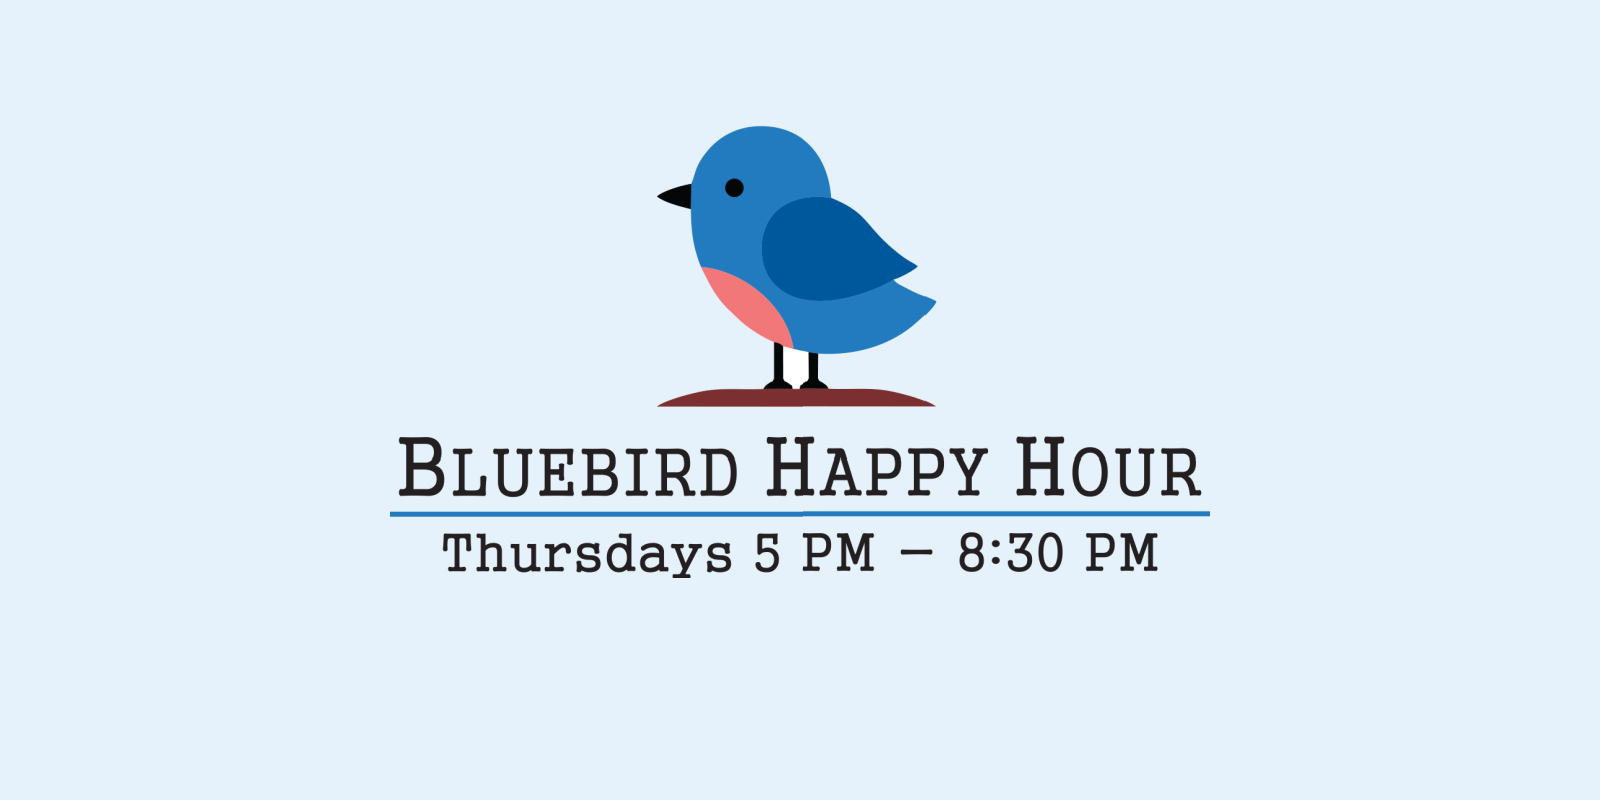 Bluebird Happy Hour in The Grove at GPAC promotional image